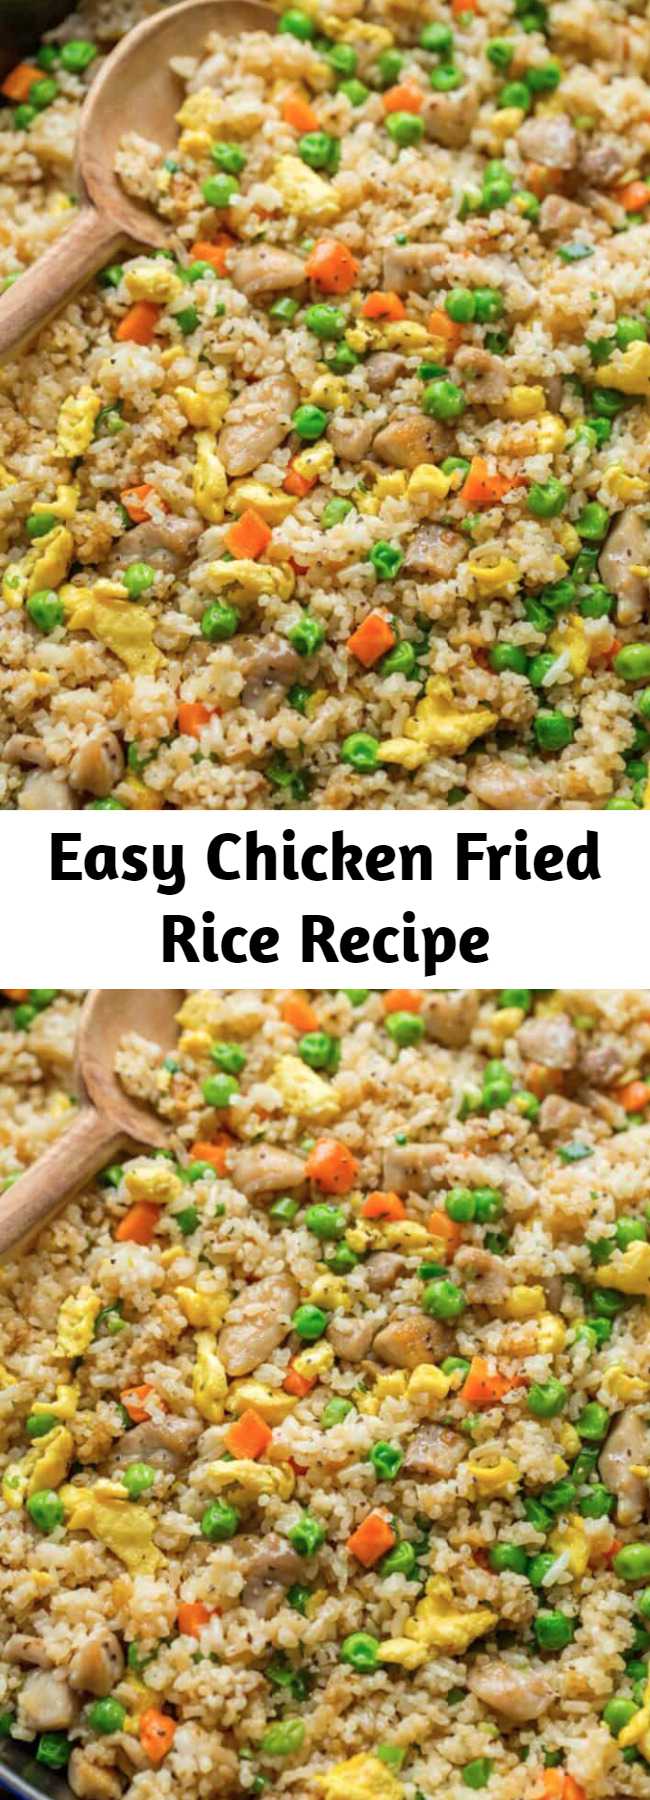 Easy Chicken Fried Rice Recipe - Chicken Fried Rice is one of our go-to EASY 30-minute meals. Fried Rice is perfect for meal prep and a genius way to use leftovers. It's actually even better with leftover rice. #chickenfriedrice #friedrice #chickenrecipes #30minutemeals #rice #friedricerecipe